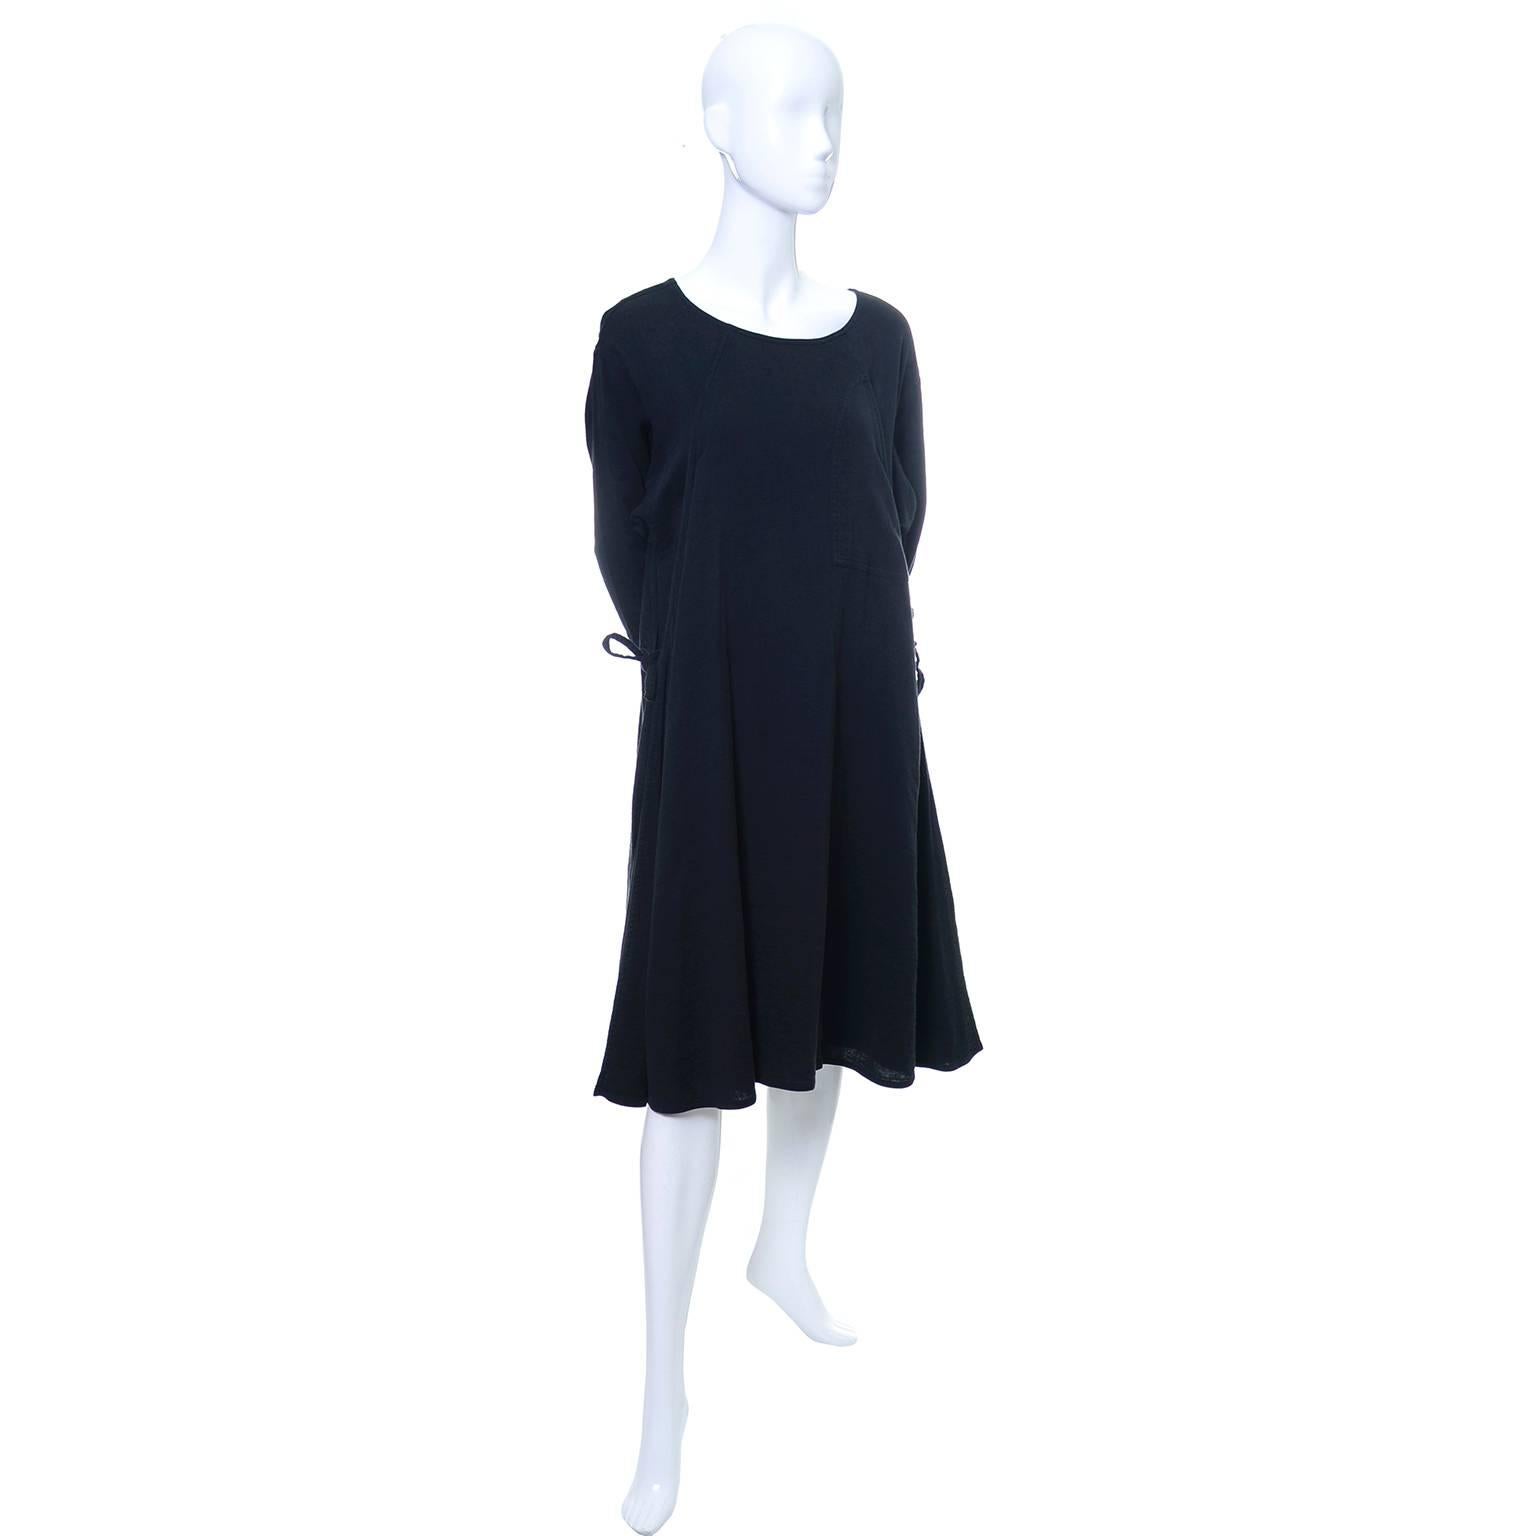 This vintage Issey Miyake Sport black cotton day dress can be worn as a dress or a long tunic.  The dress slips overhead, has side ties and is made in a gauzy black cool cotton. The dress was made in the 1980's in Japan and has the expected very